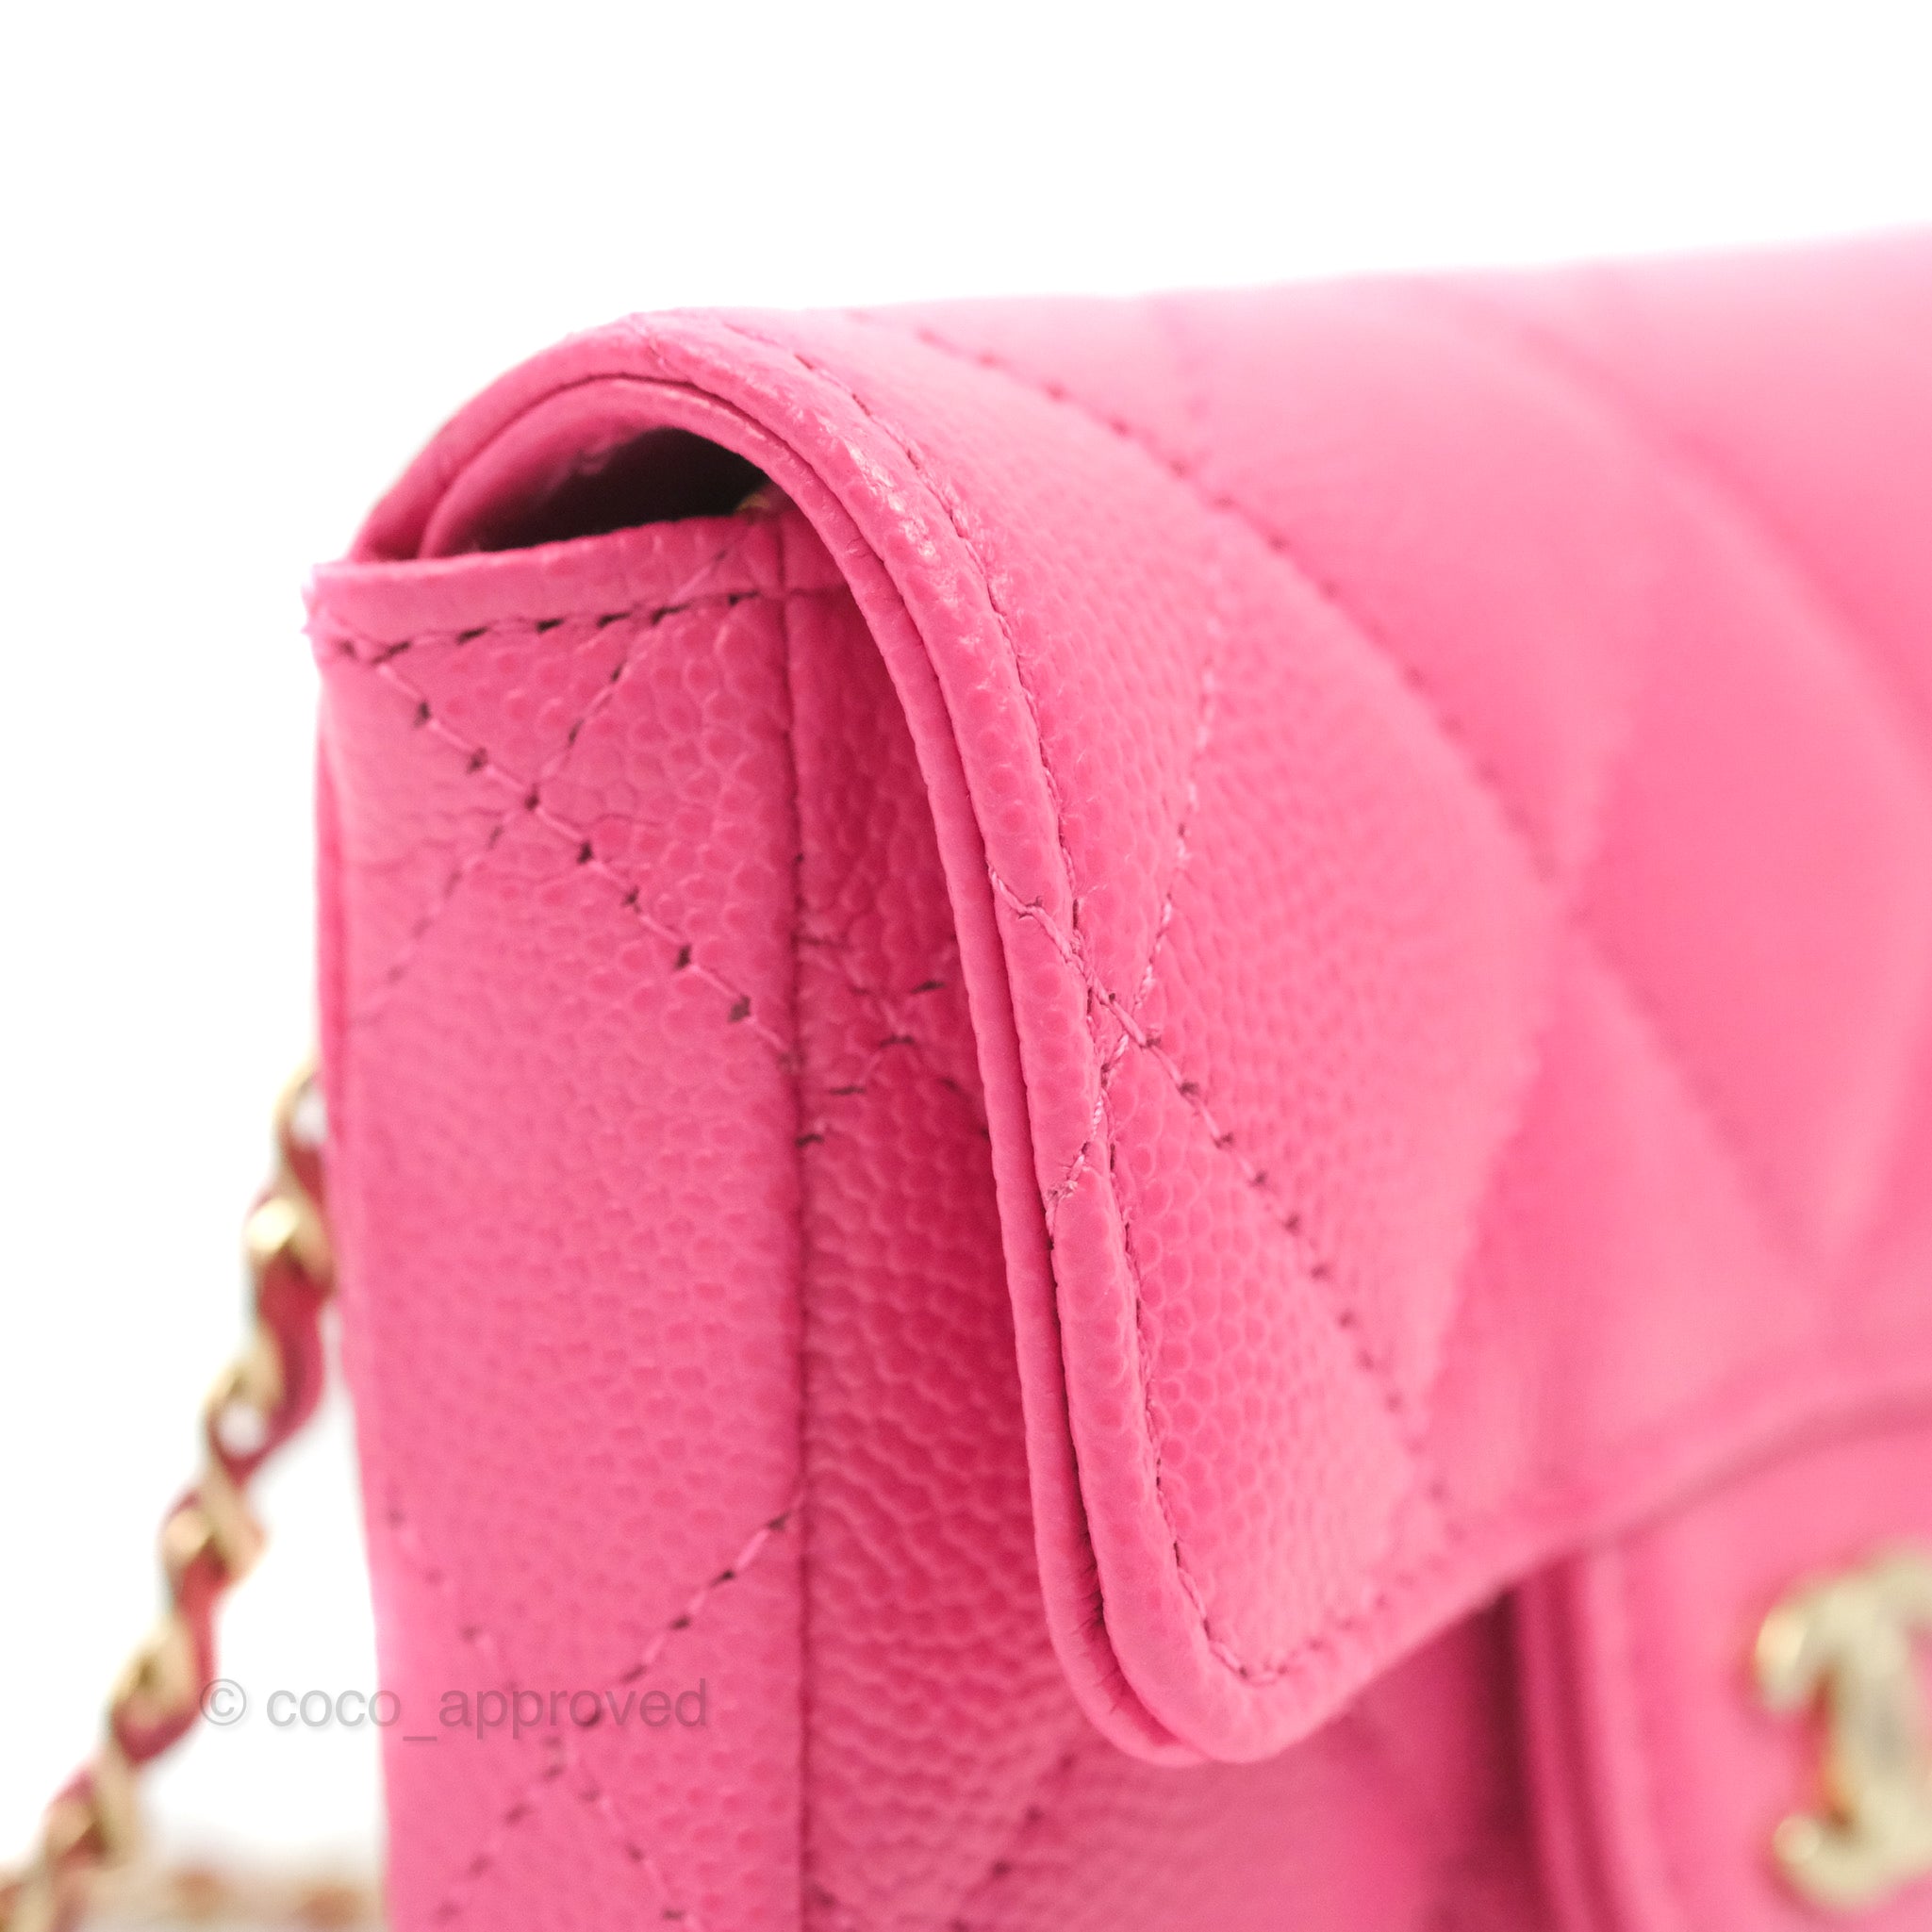 Chanel Classic Quilted Belt Bag Pink Caviar Gold Hardware – Coco Approved  Studio